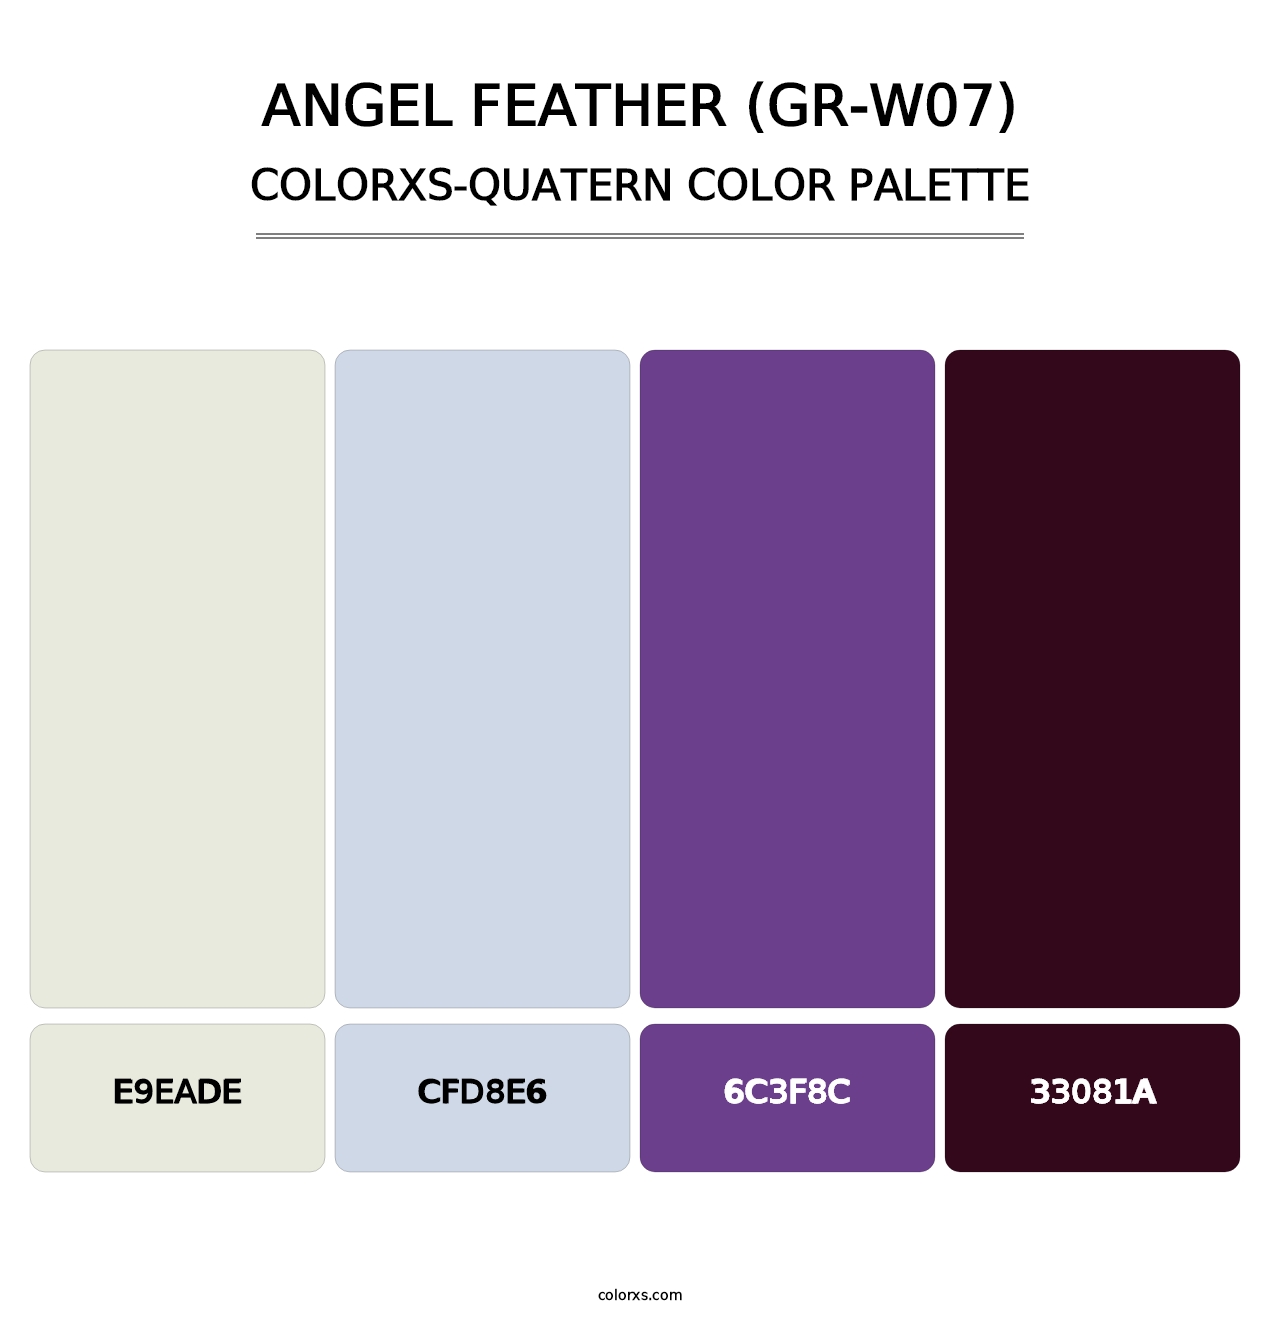 Angel Feather (GR-W07) - Colorxs Quatern Palette